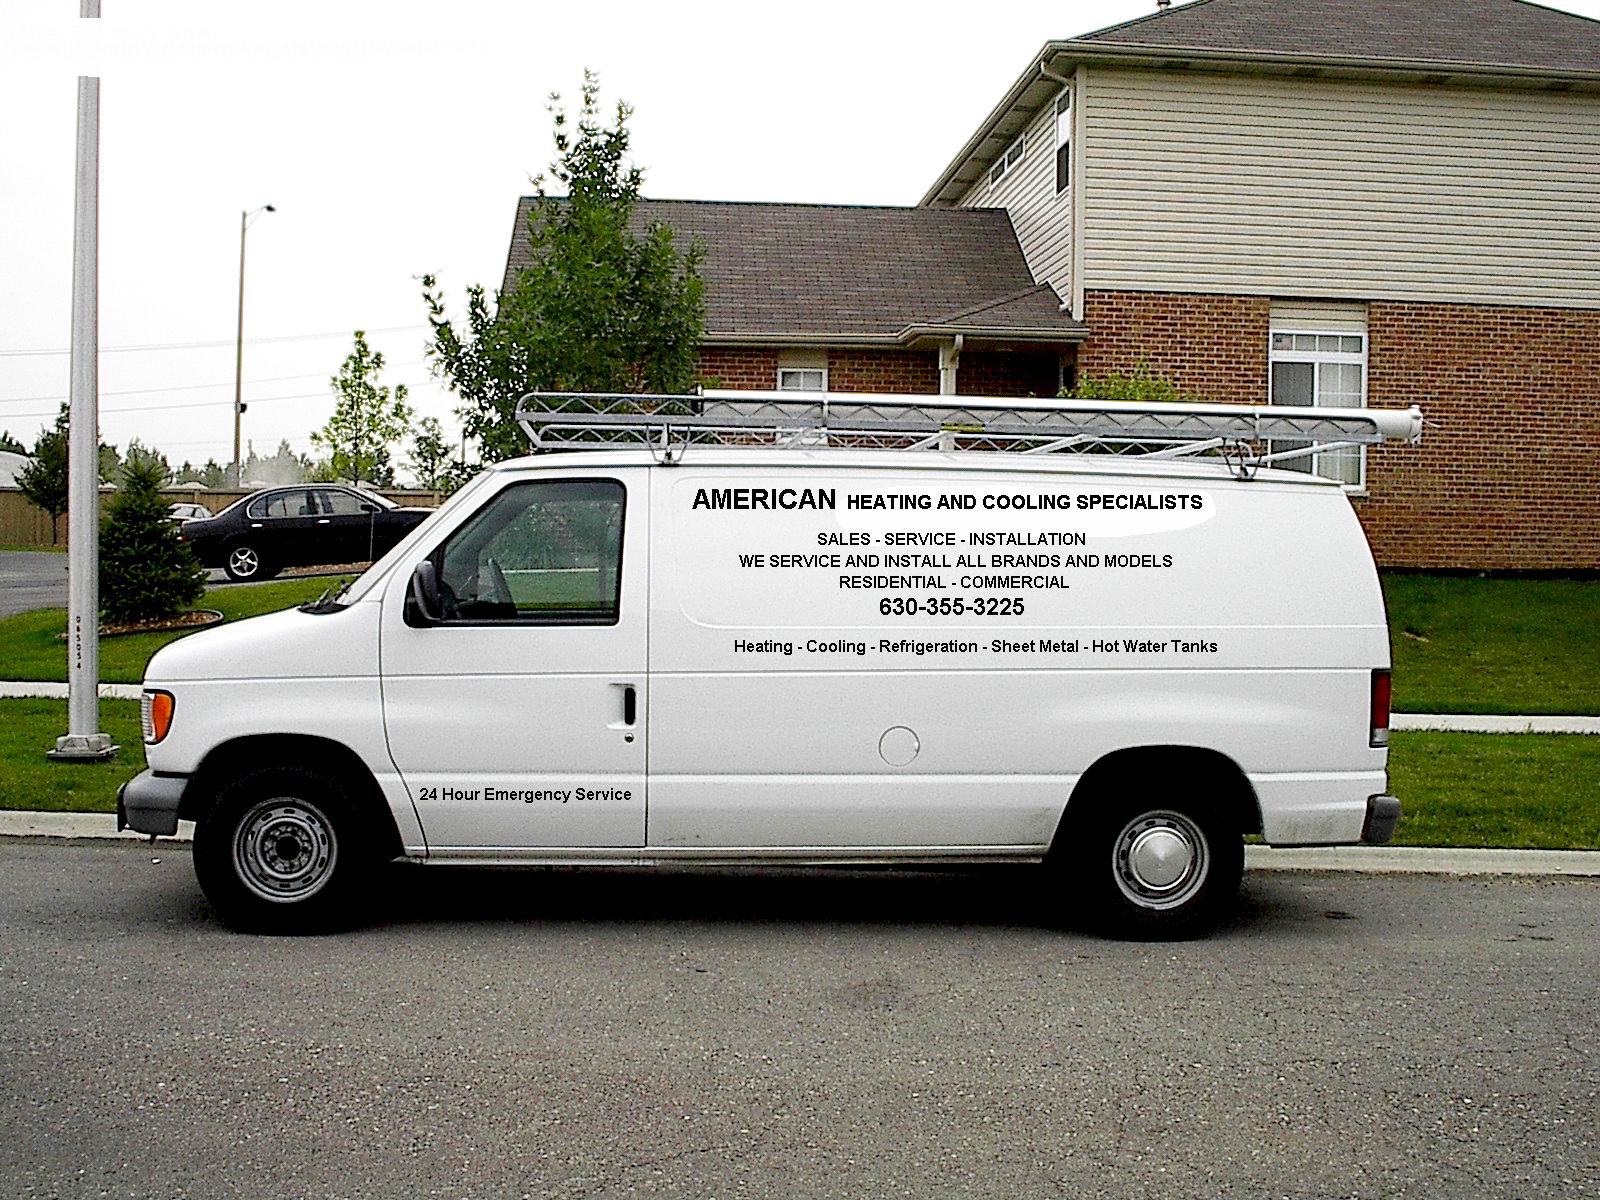 American Heating and Cooling Specialists